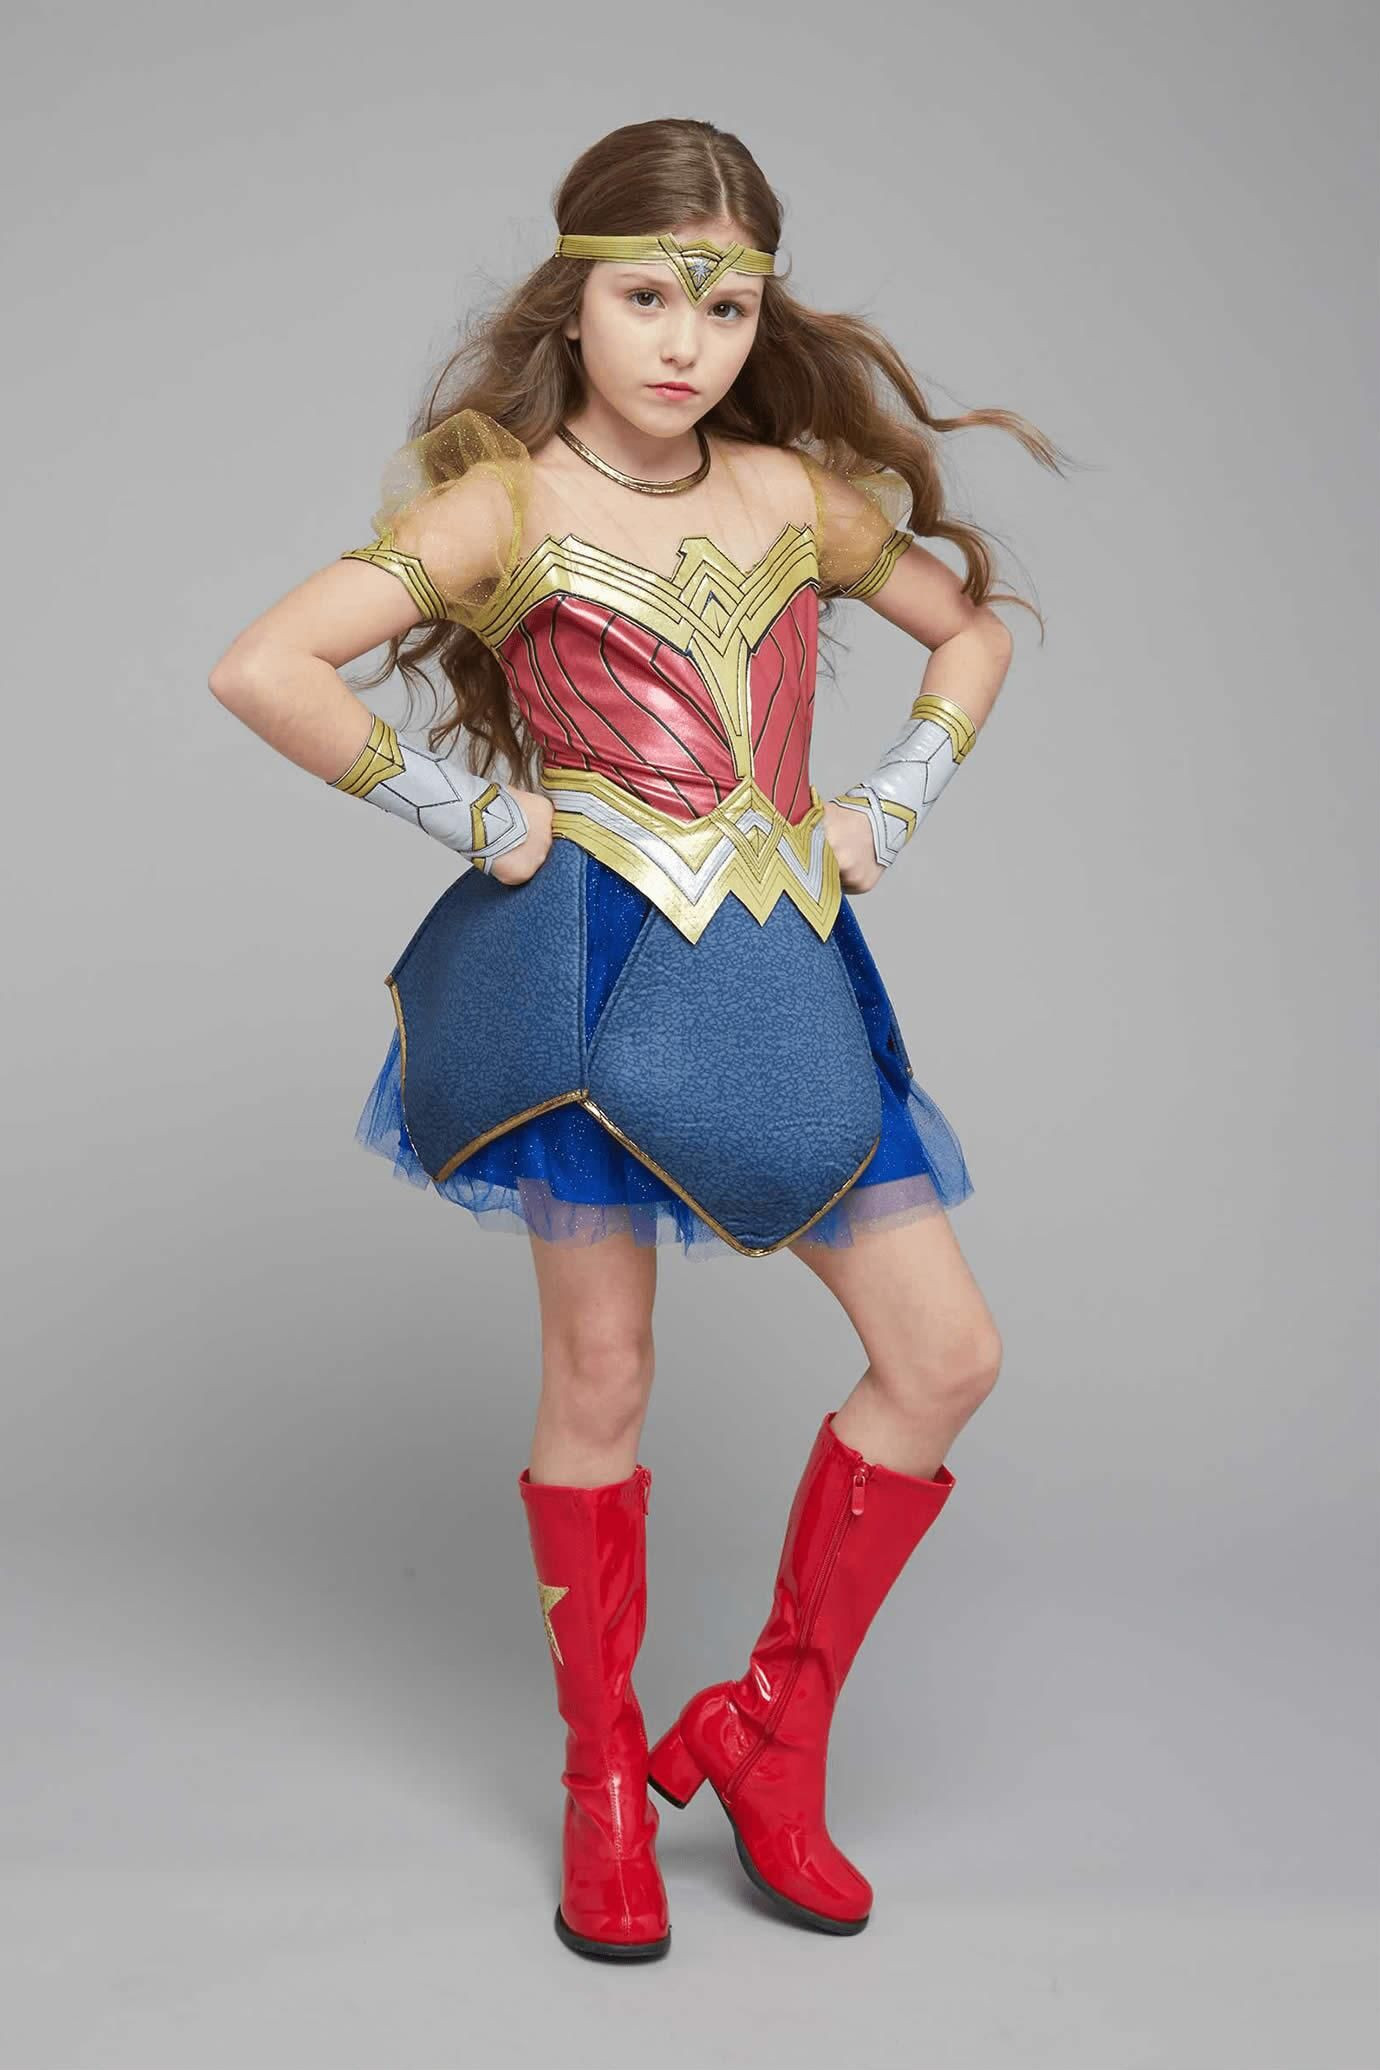 Top 20 Diy Wonder Woman Costume for Kids - Home, Family, Style and Art ...